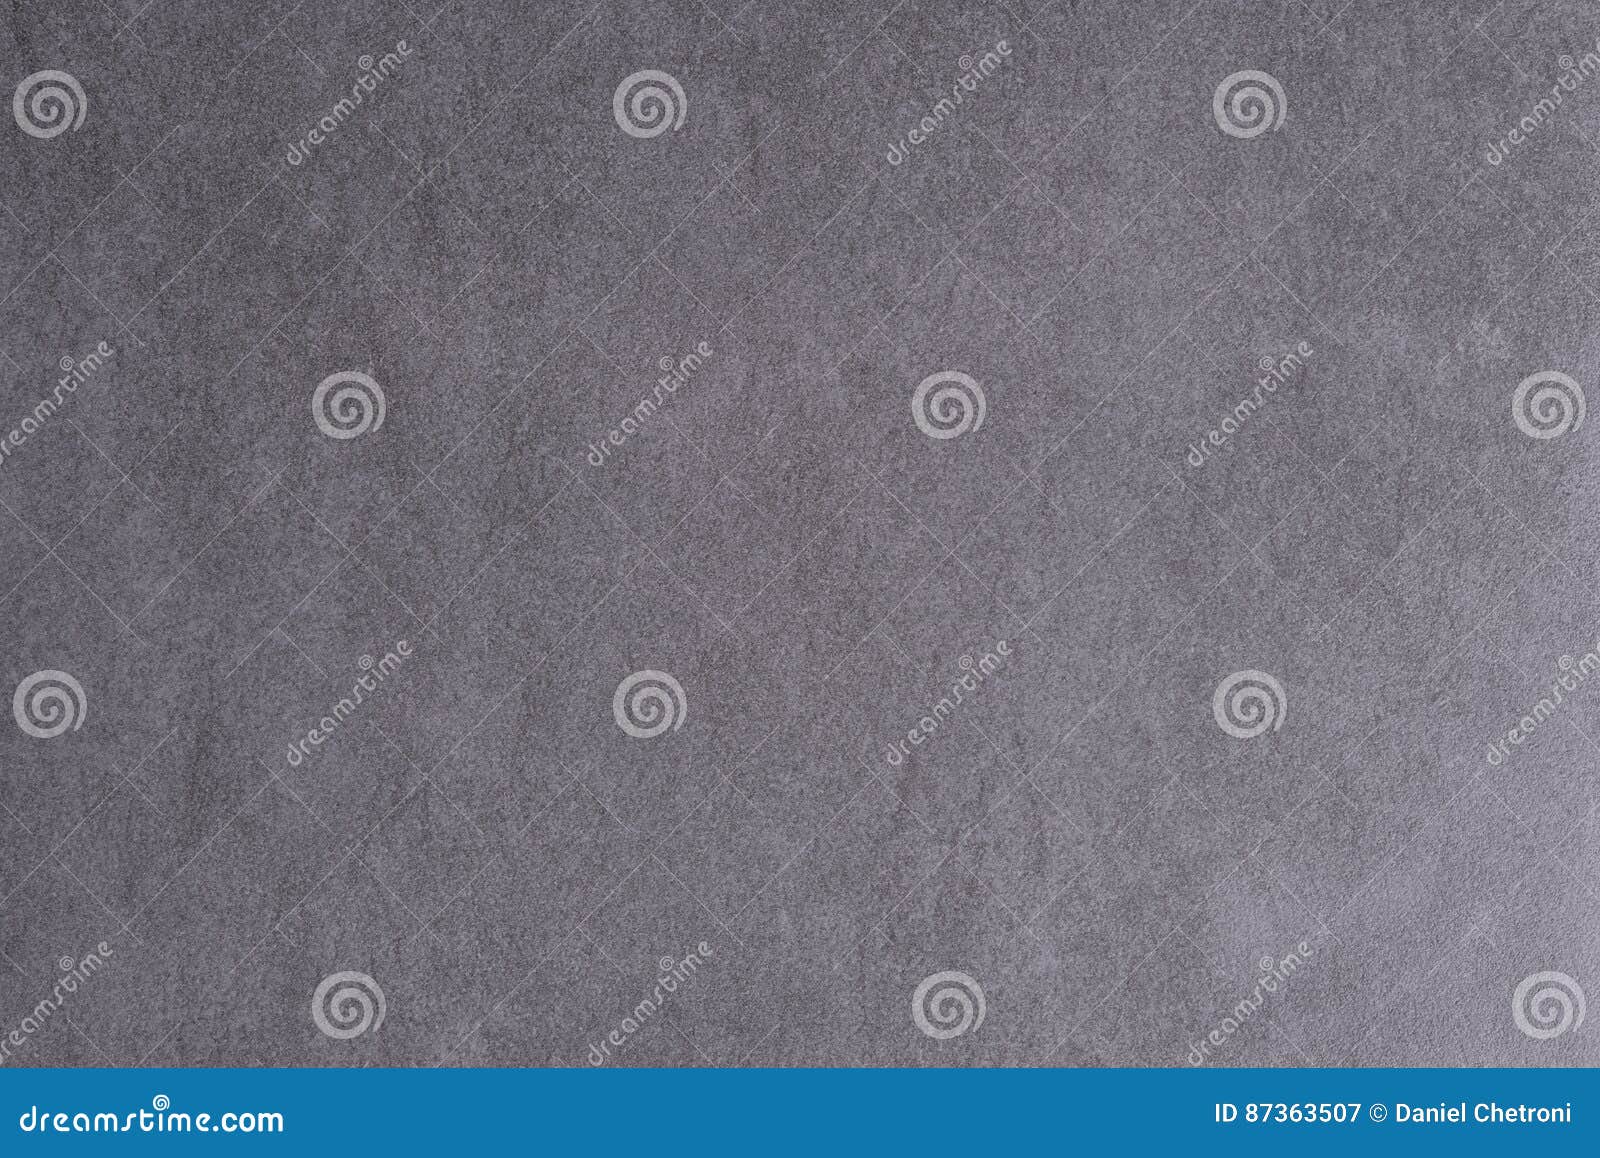 grey stone hone texture and surface background